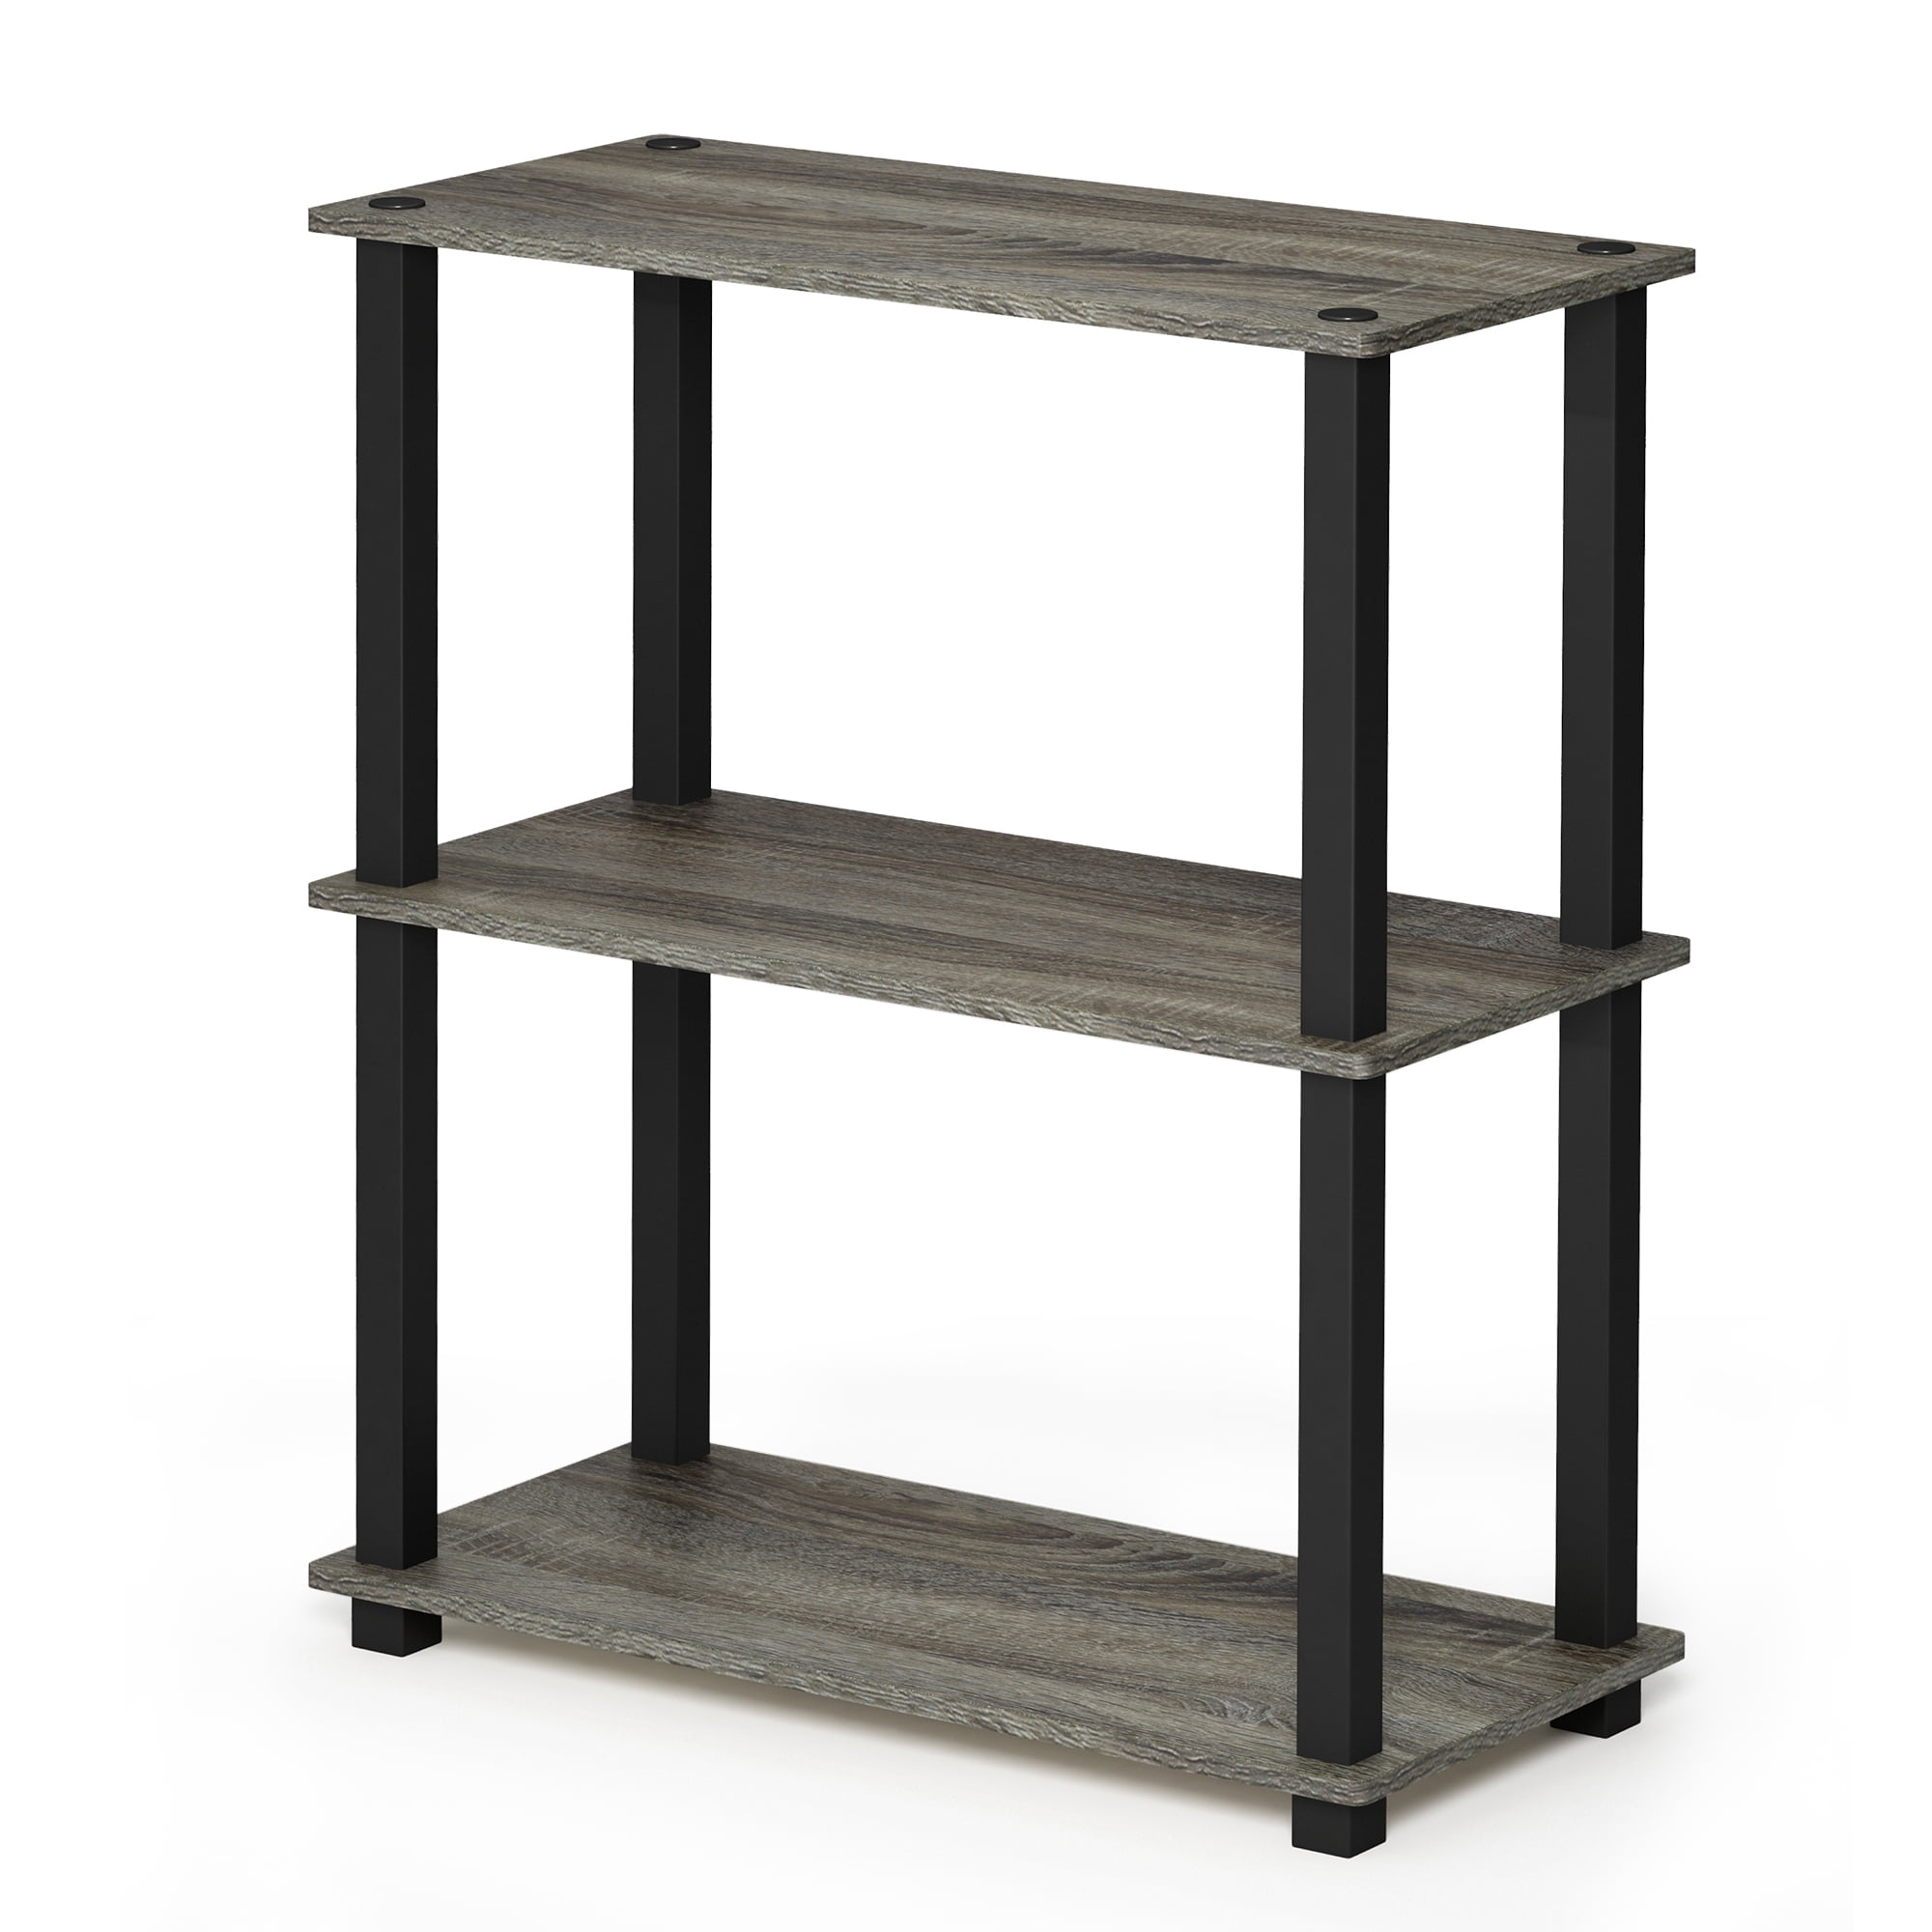 Furinno Turn-s-tube 3-tier Compact Multipurpose Shelf Display Rack Square for sale online 